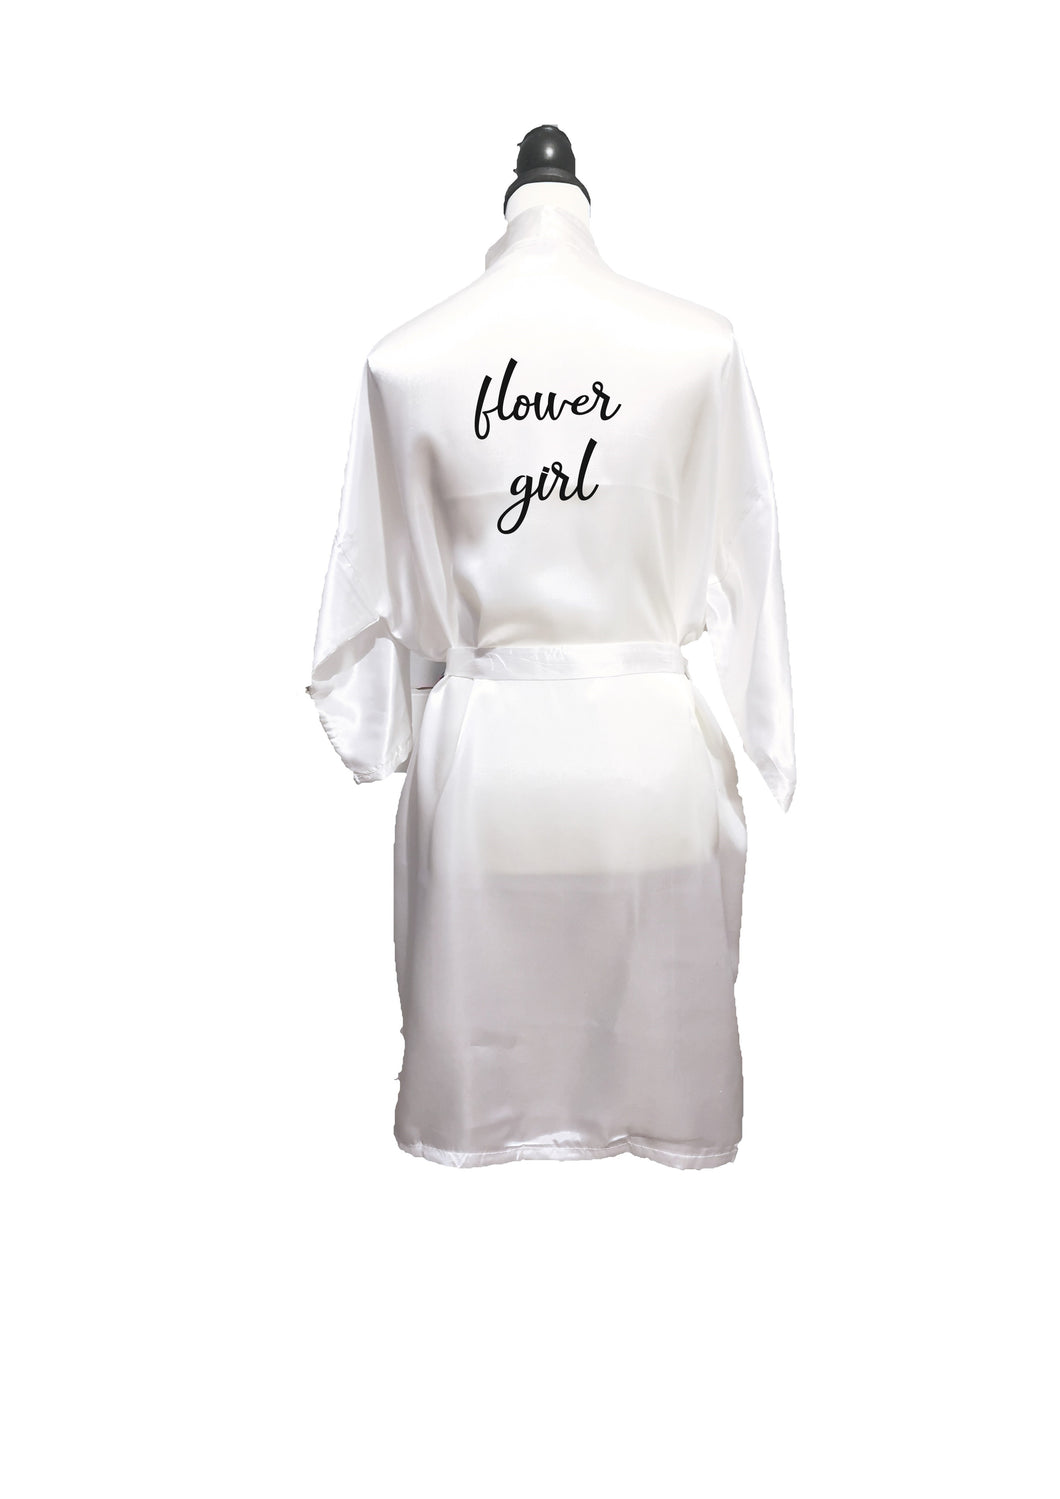 White Jersey Bridesmaid Robes, Personalised Bride Dressing Gowns,  Bridesmaids Dressing Gowns, Wedding Robes, Mother of the Bride, Any Text -  Etsy | Bridesmaid dressing gowns, Bride dressing gown, Bridesmaid robe  personalized